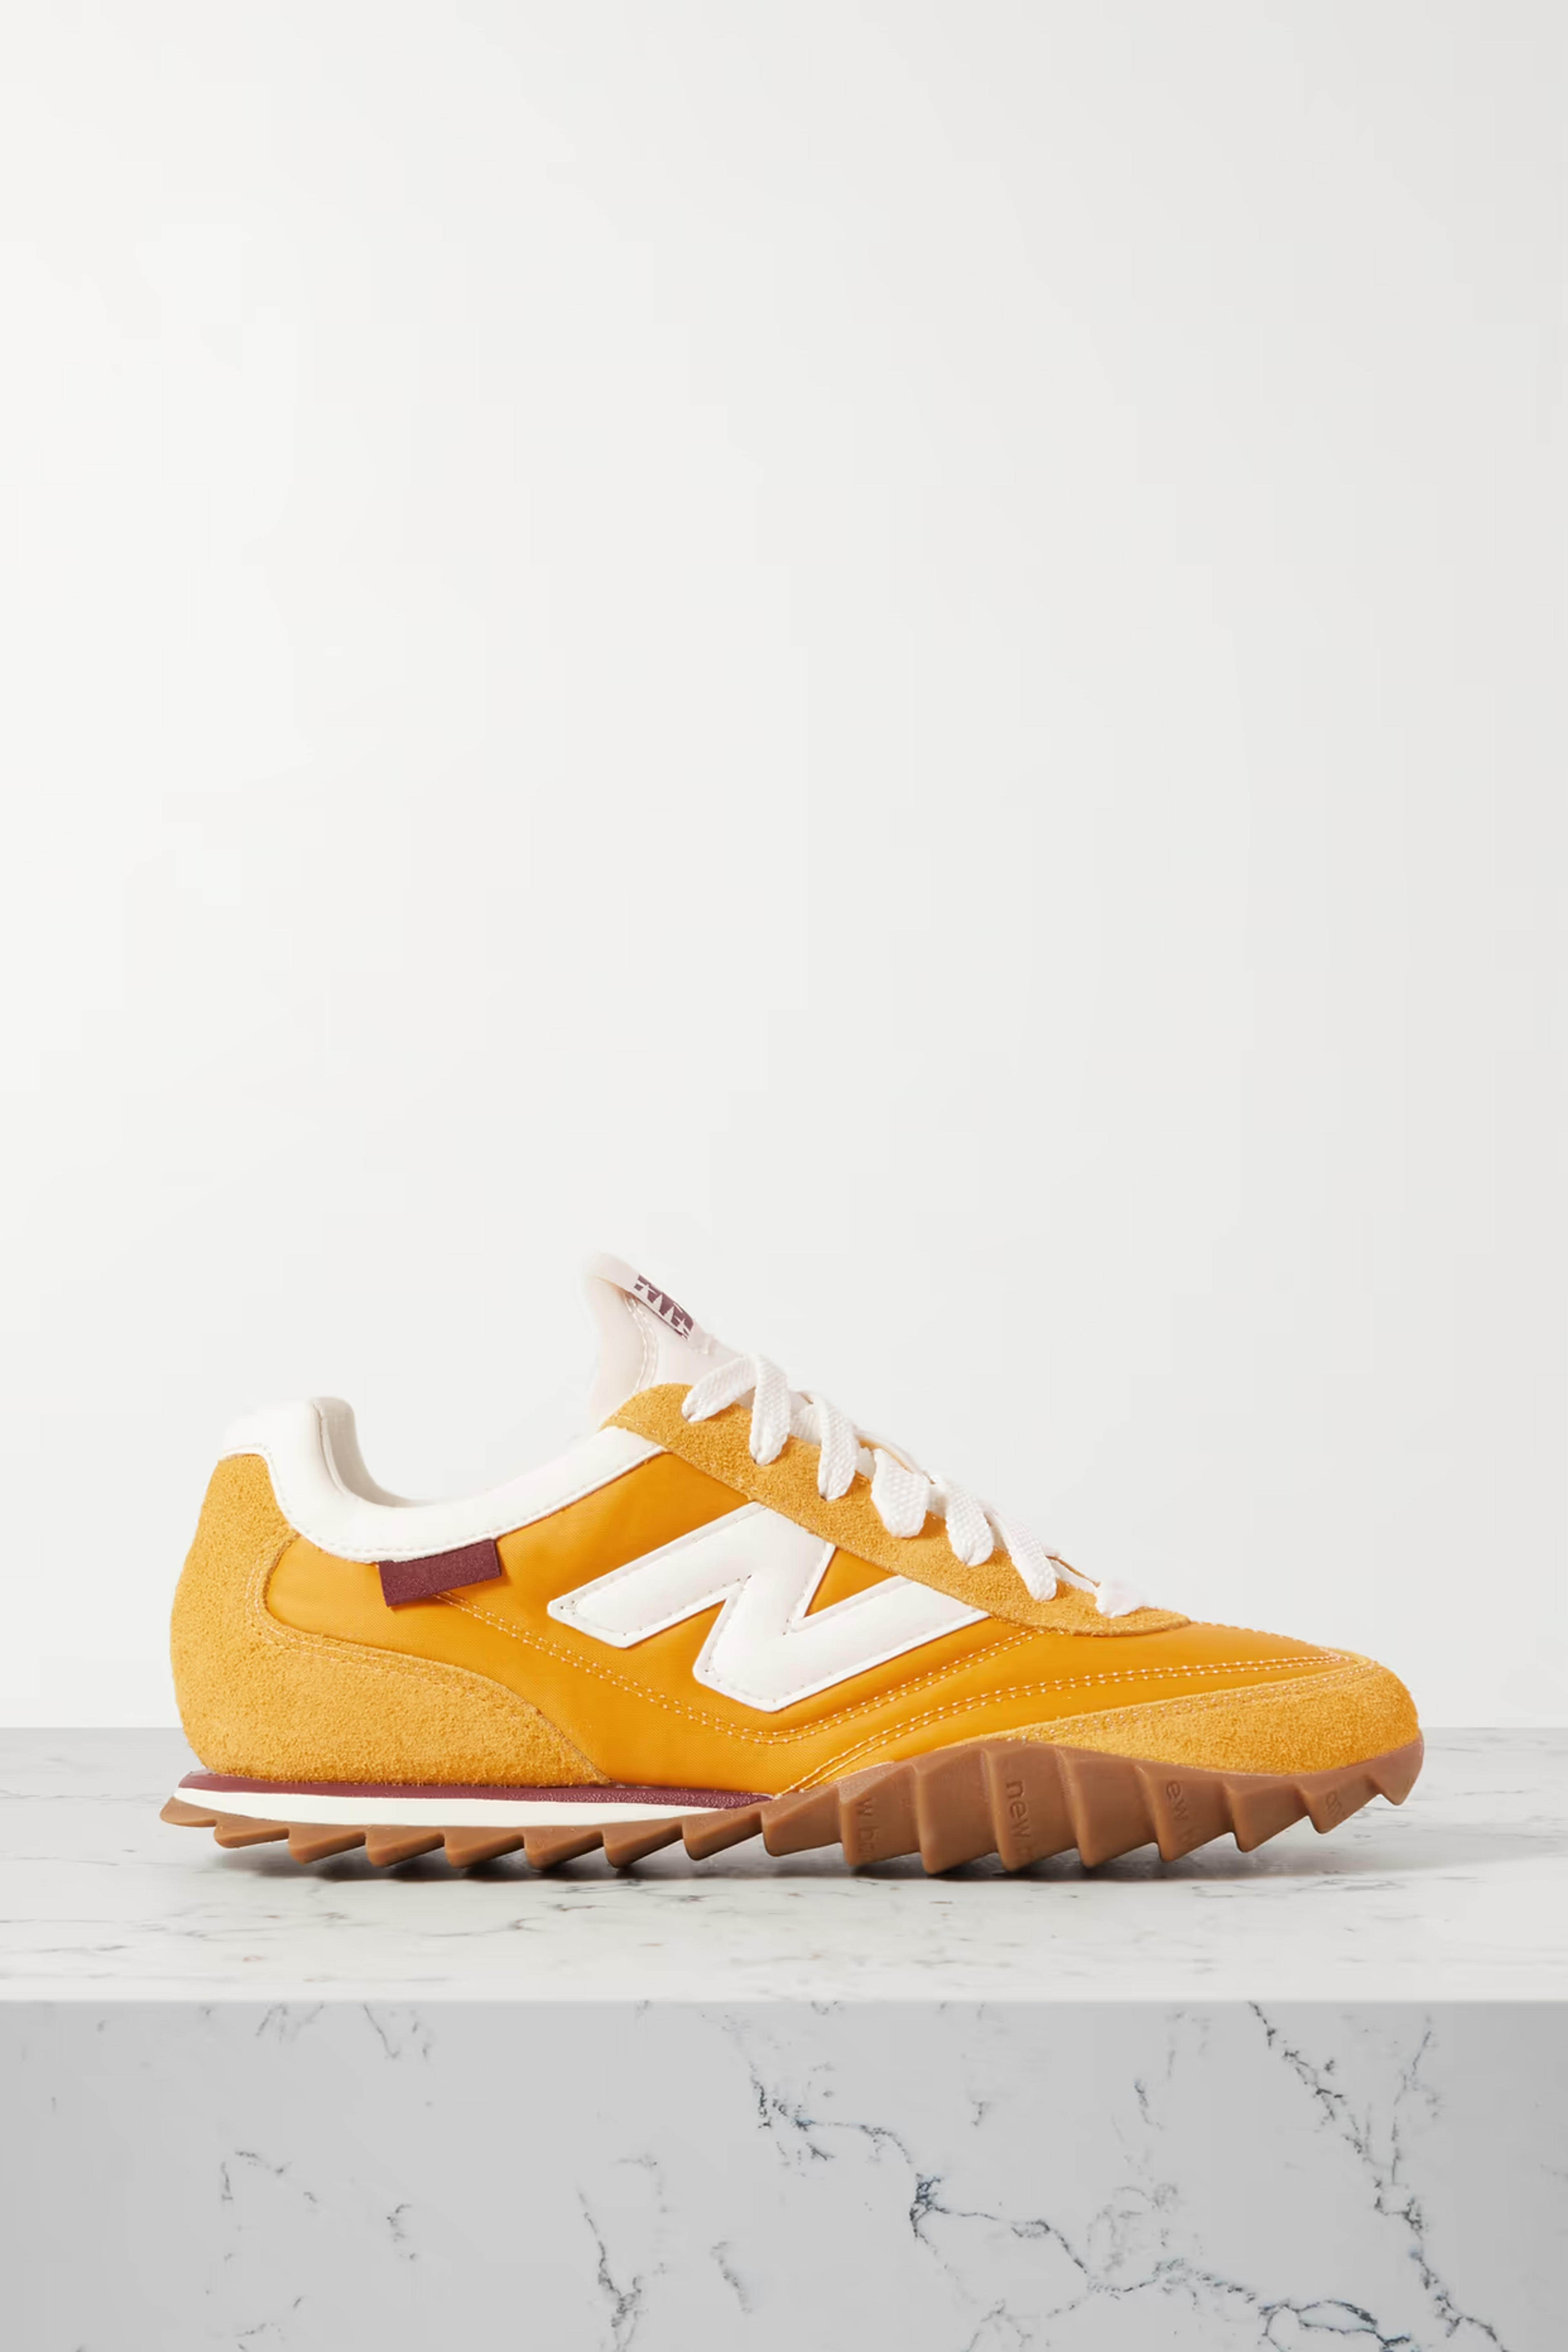 NEW BALANCE - + Donald Glover RC 30 canvas, leather and brushed-suede sneakers